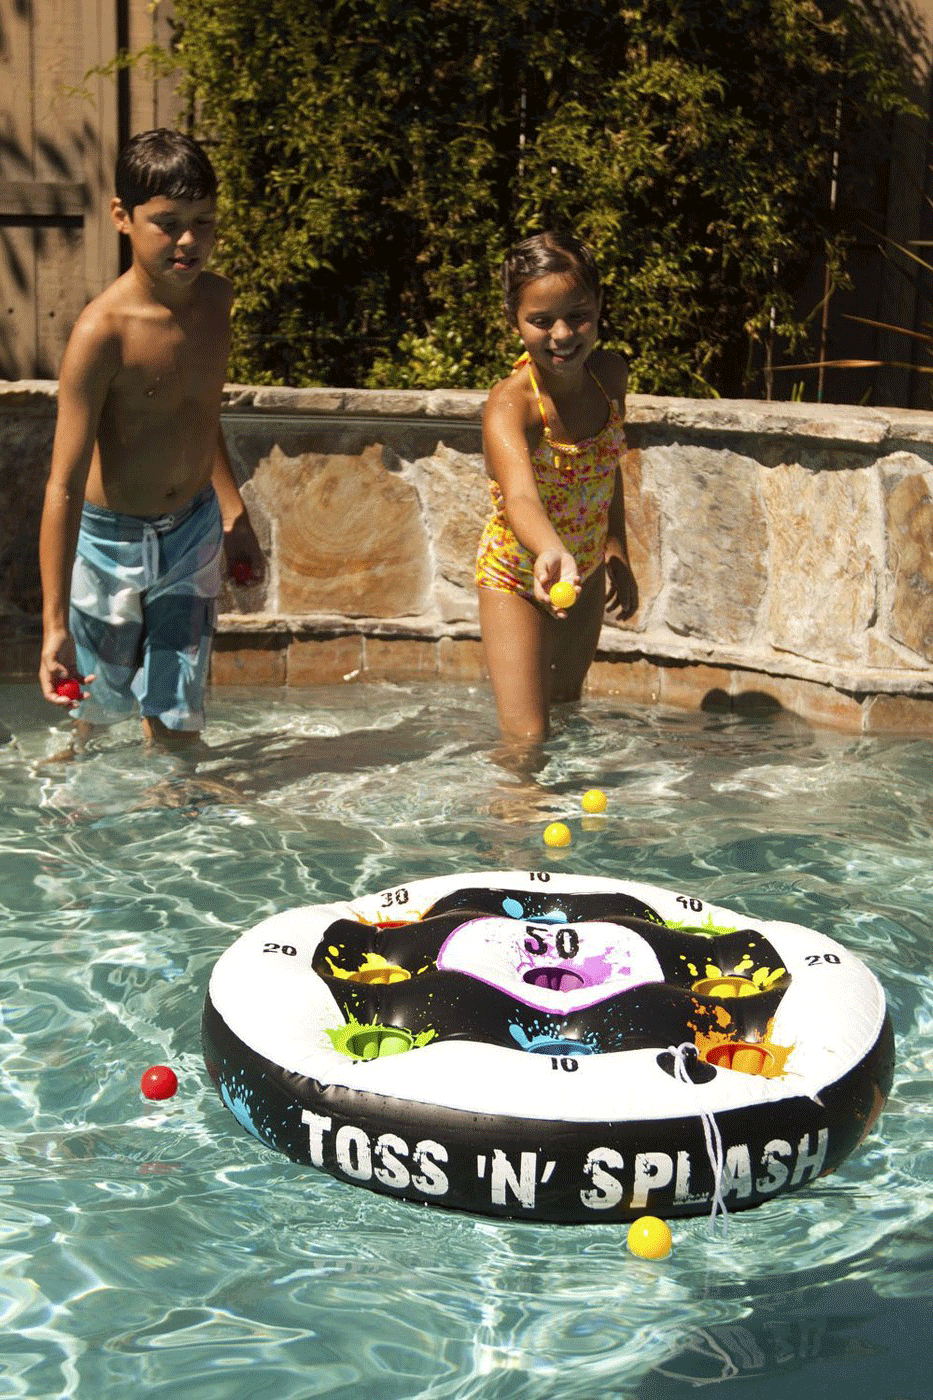 8 Fun Games for your Next Pool Party - Hastings Water Works